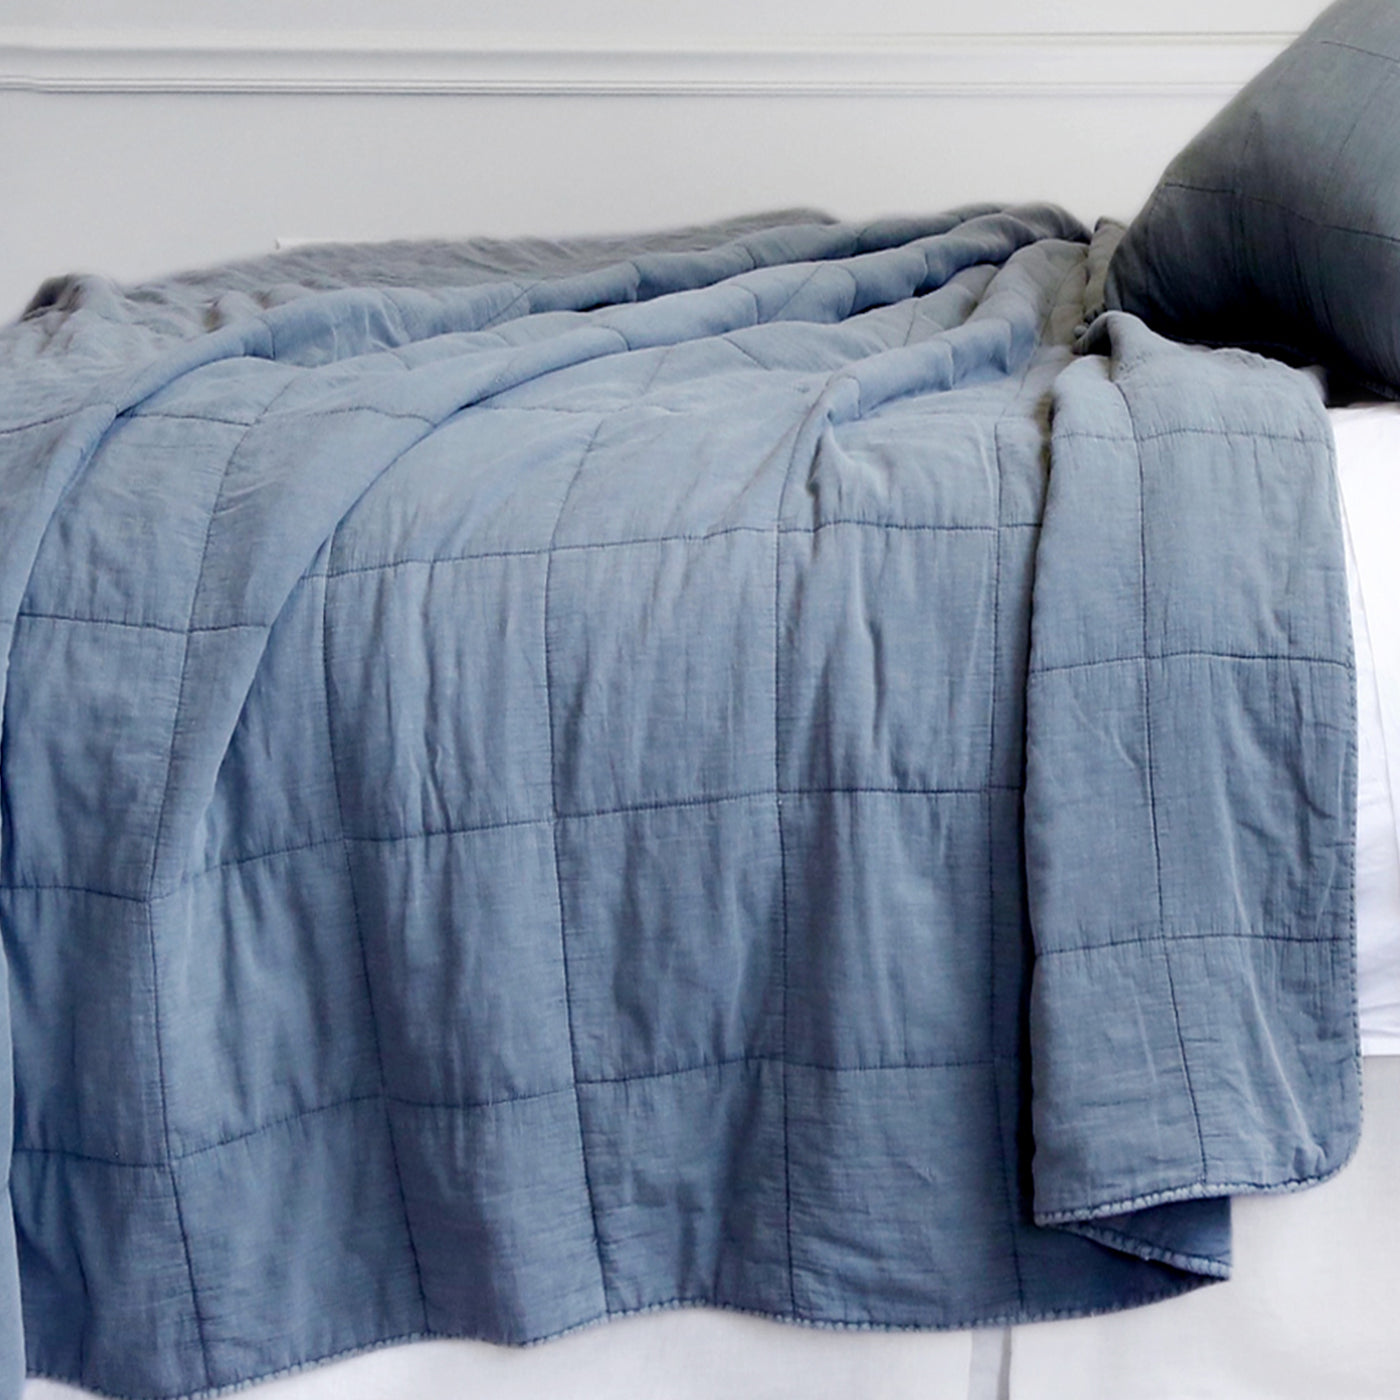 antwerp - navy color - coverlet - pom pom at home